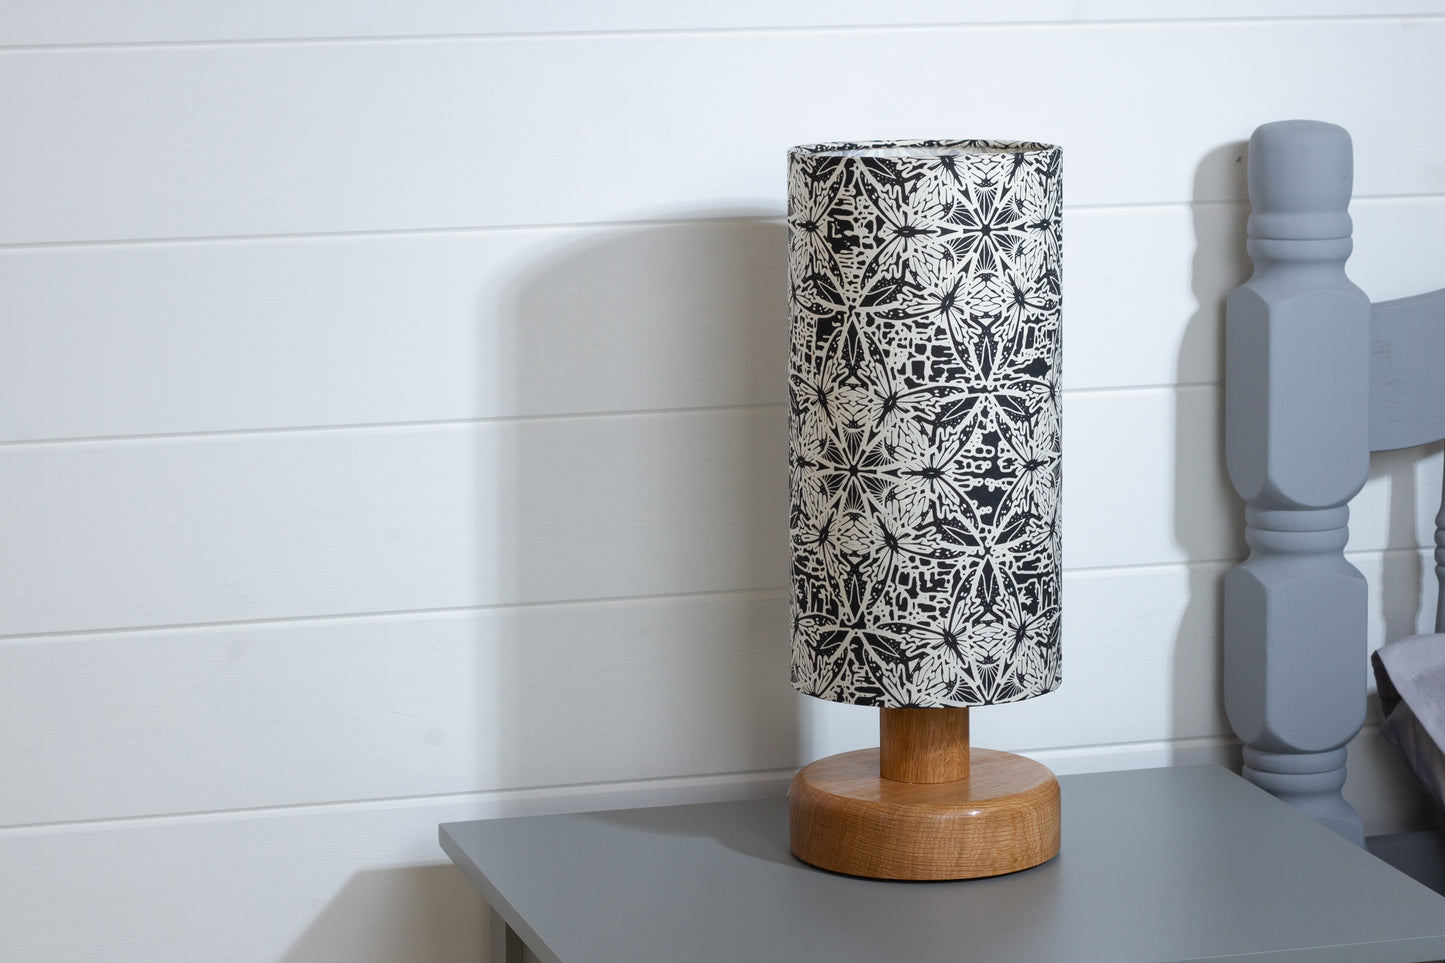 Round Oak Table Lamp (15cm) with 15cm x 30cm Drum Lampshade in B136 ~ Butterfly Kaleidoscope Black